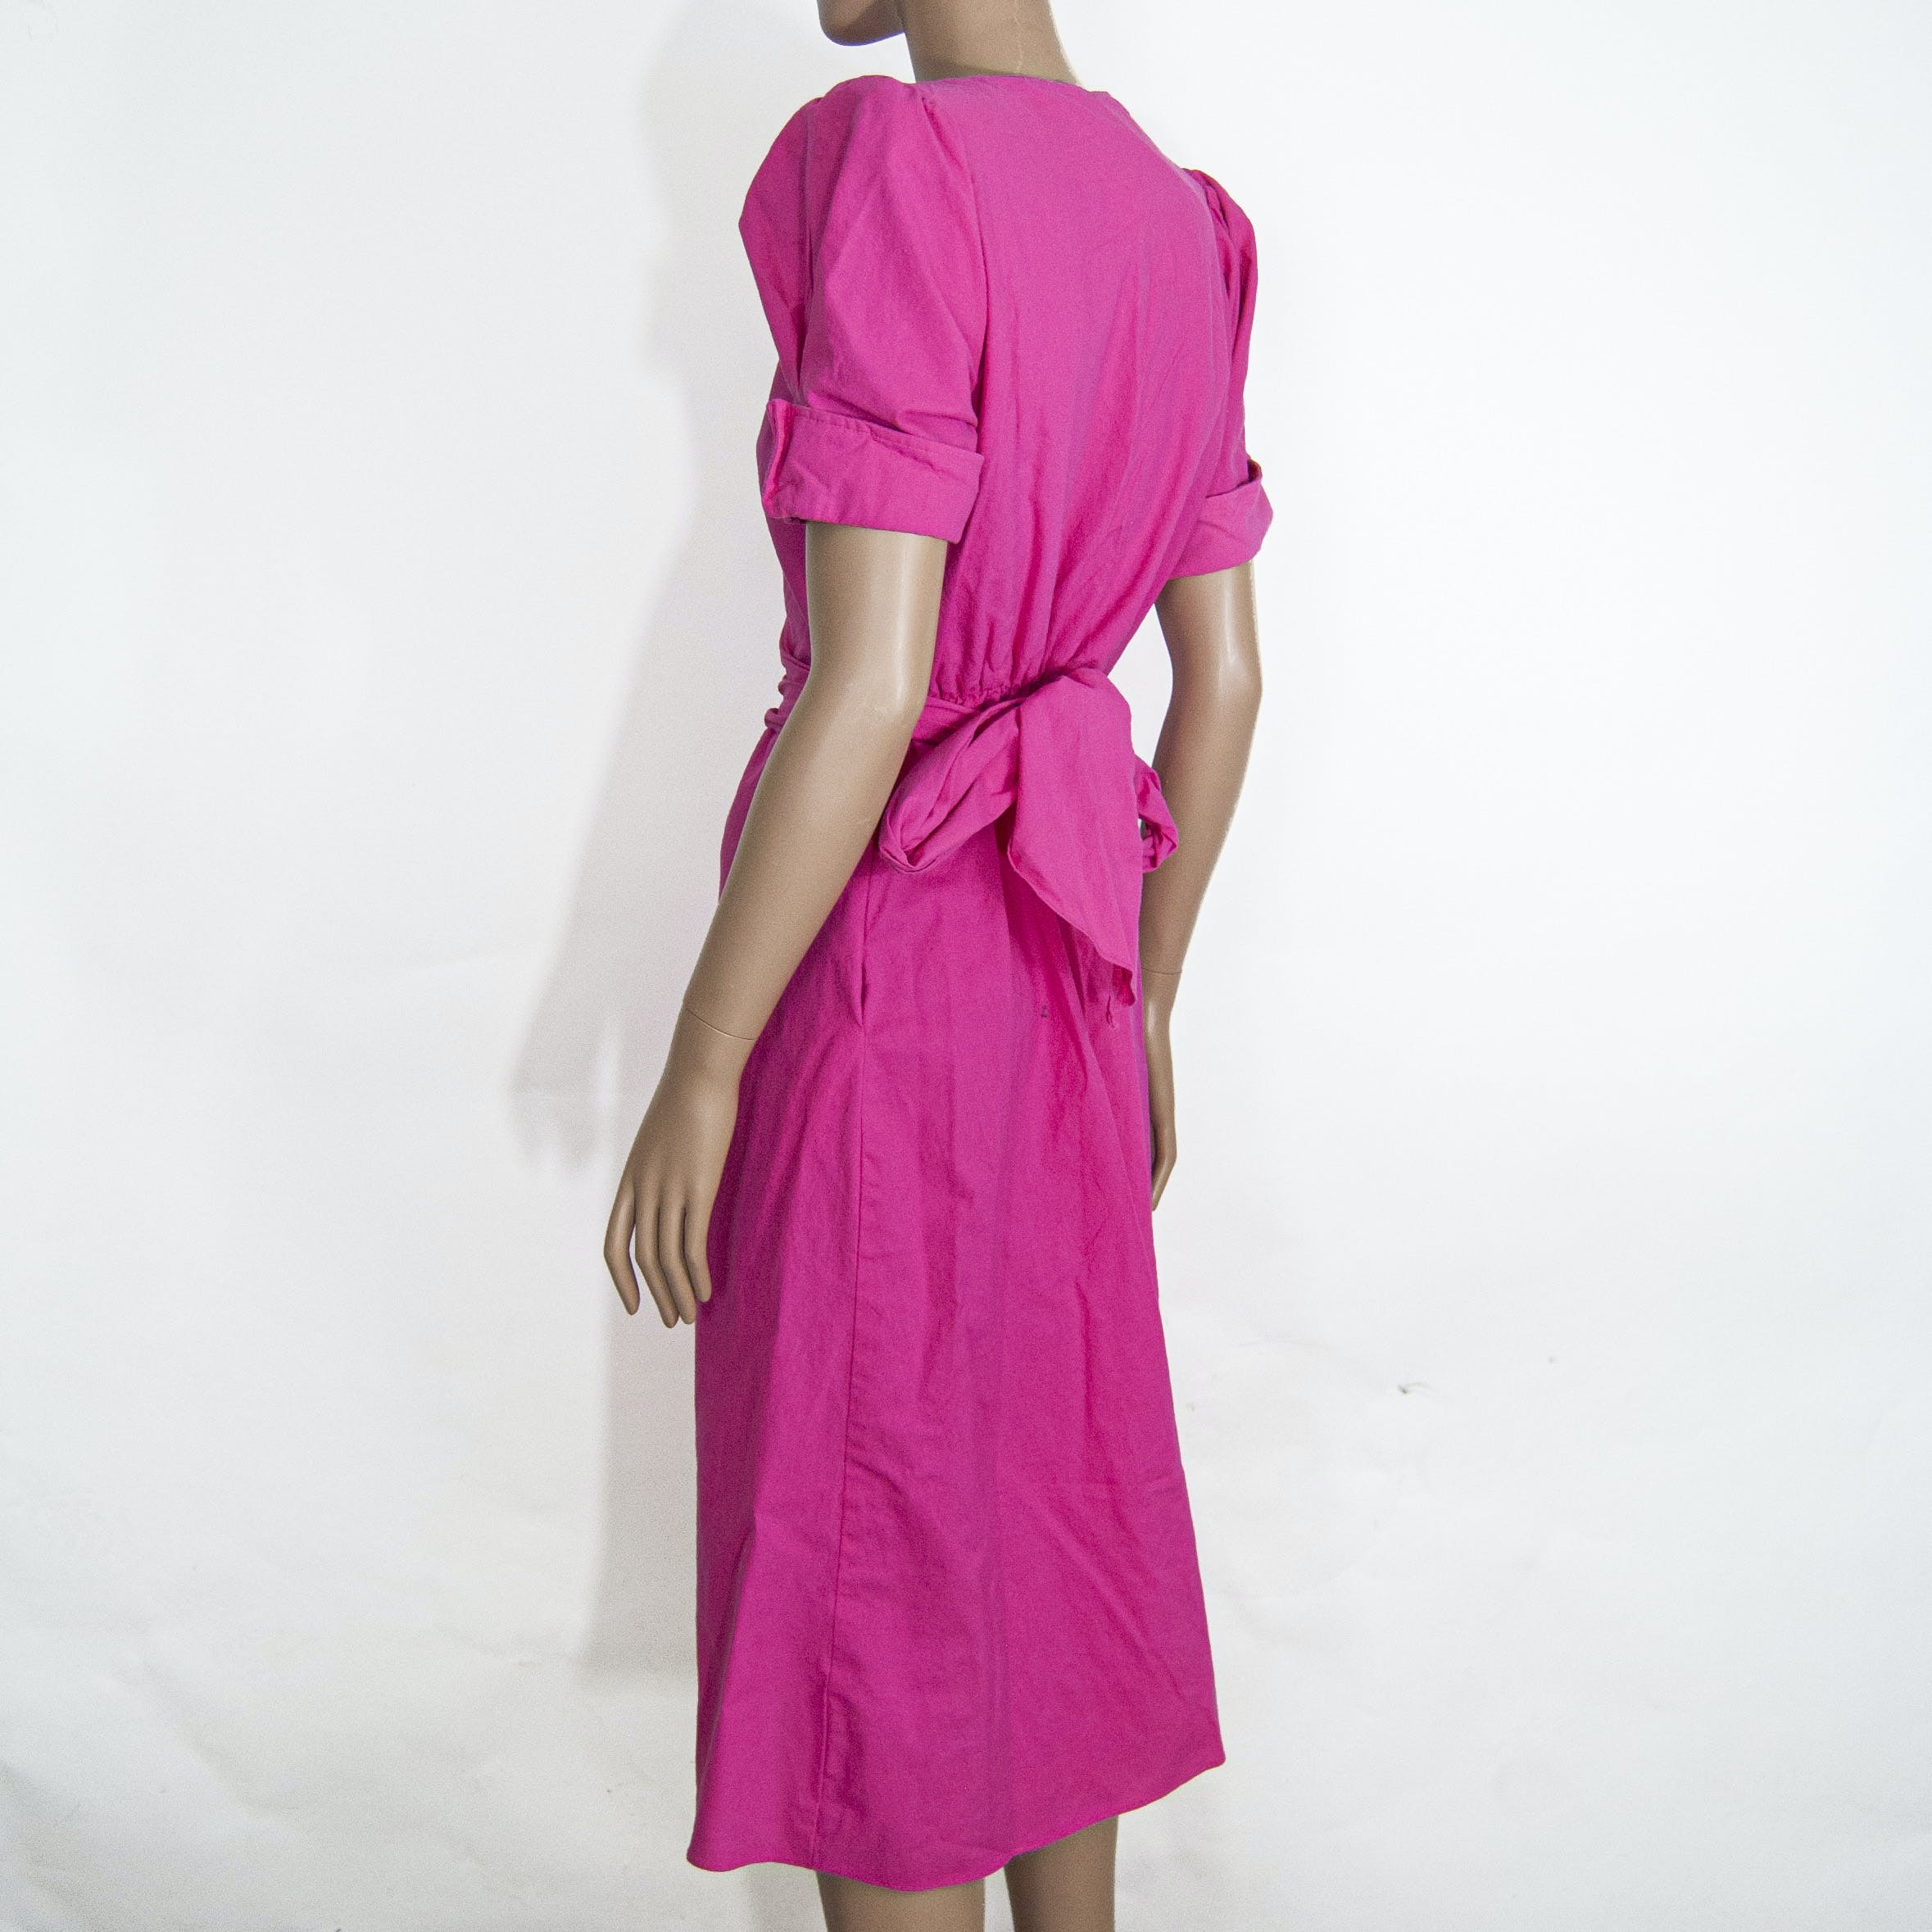 Vintage 80's Hot Pink Cotton Puff Sleeve Day Dress by Tina Barrie ...